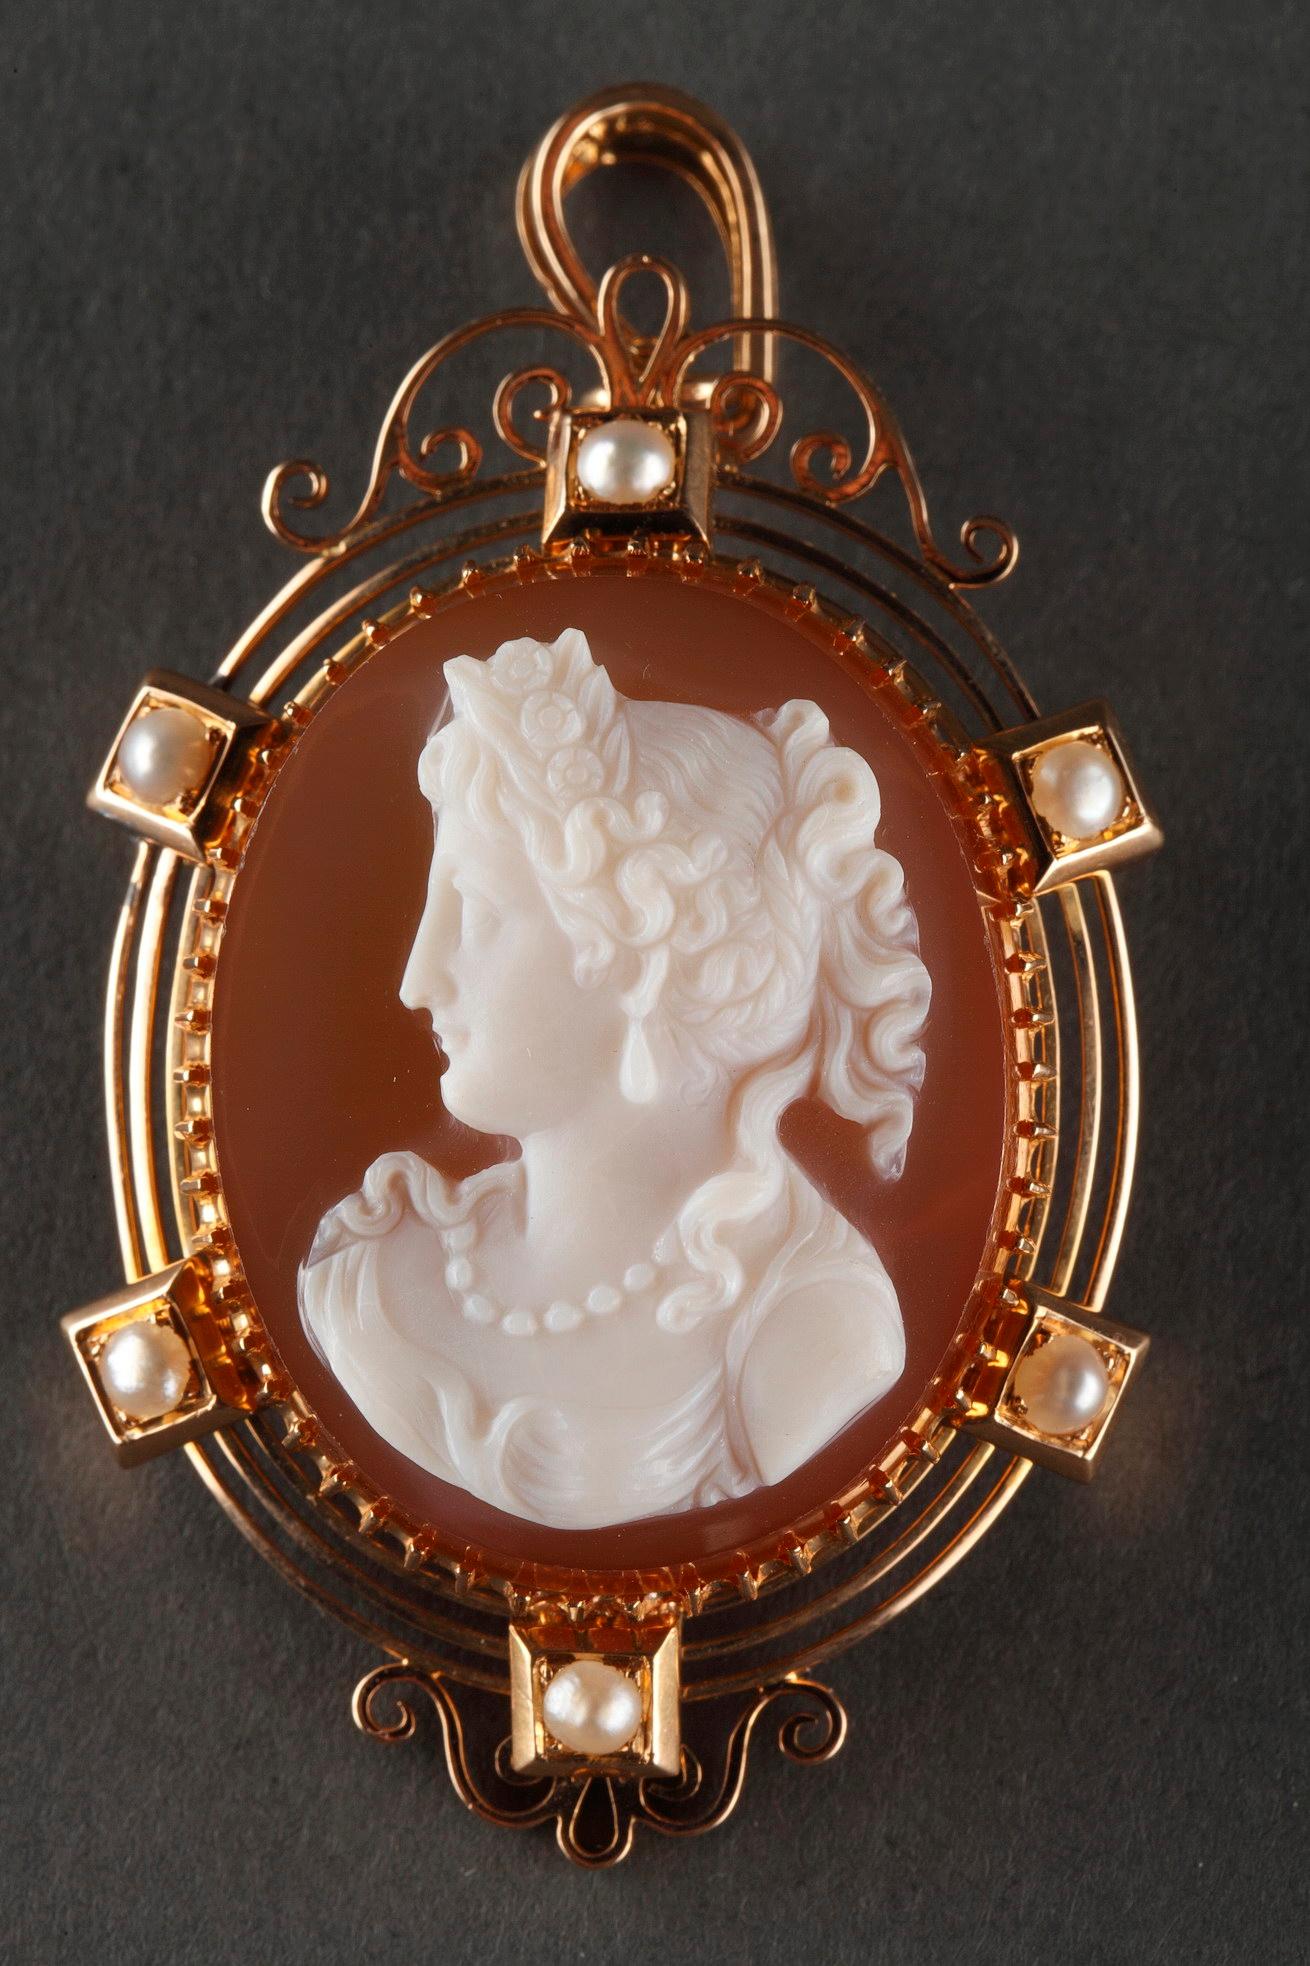 Cameo on orange-pinkagate featuring a young woman looking toward the left. The artist intricately sculpted the white vein of the agate to bring the delicate profile to life. This young woman in bust has hair up and girded with a floral diadem. She